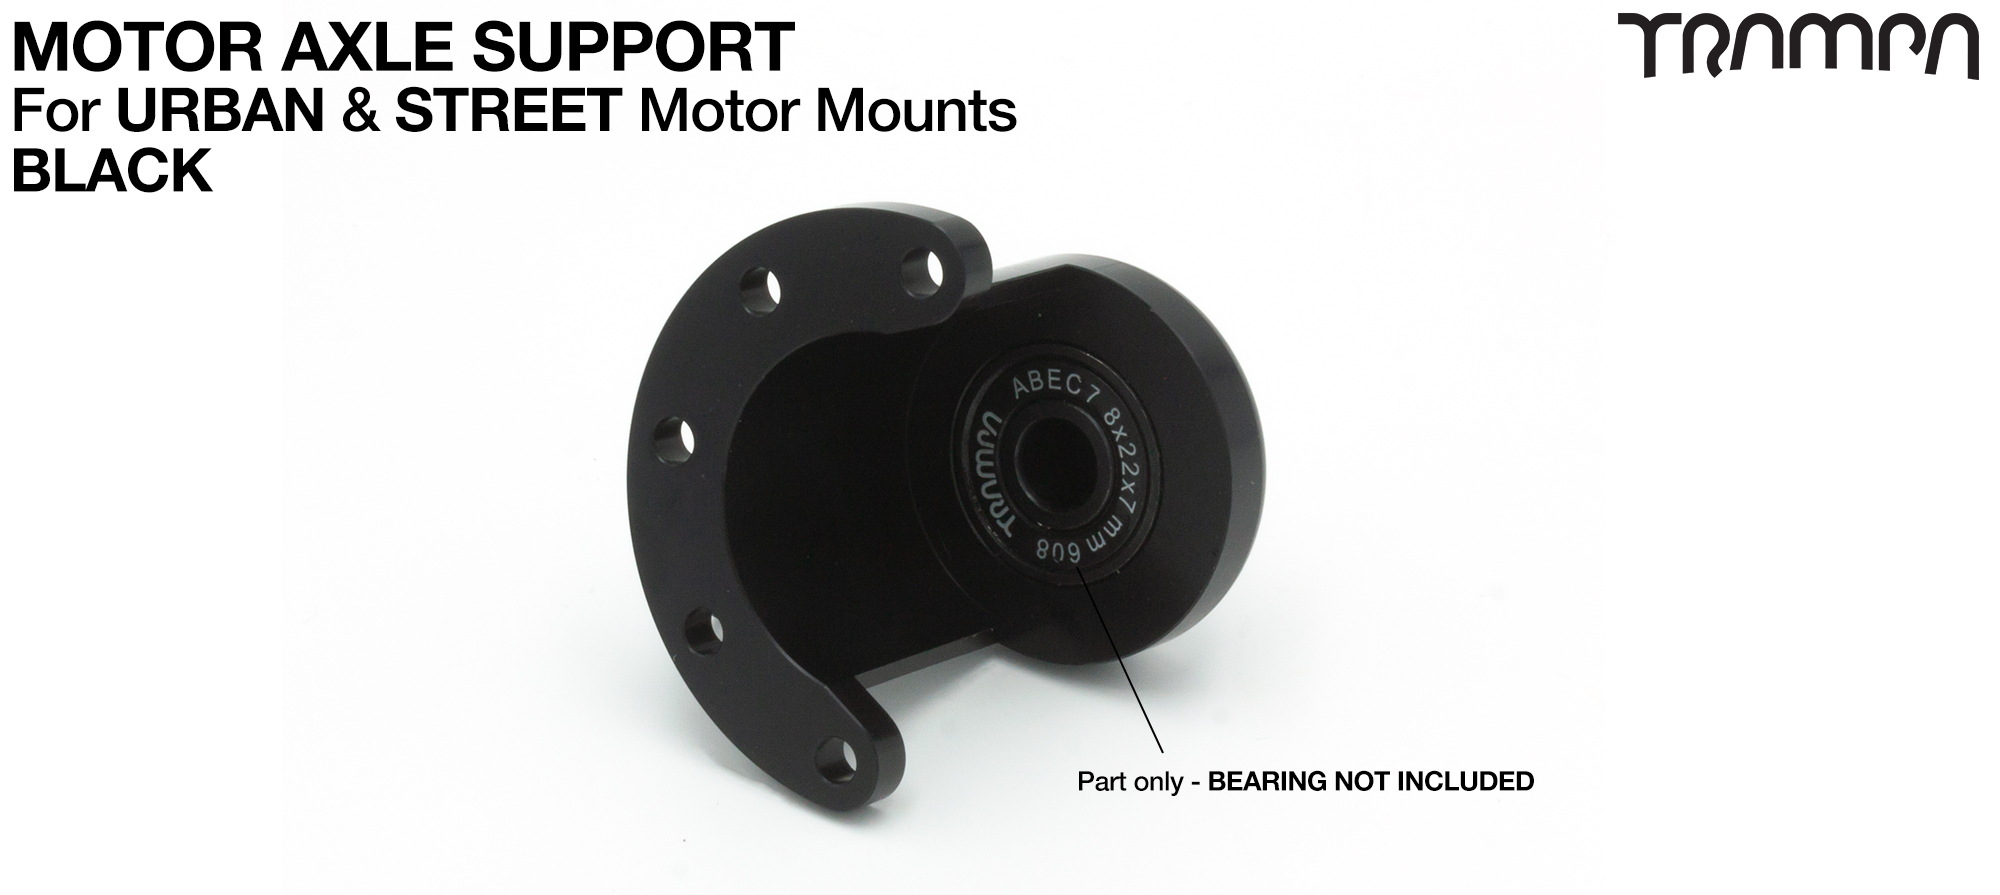 Motor Axle Support for Spring Truck Motor Mounts UNIVERSAL - BLACK